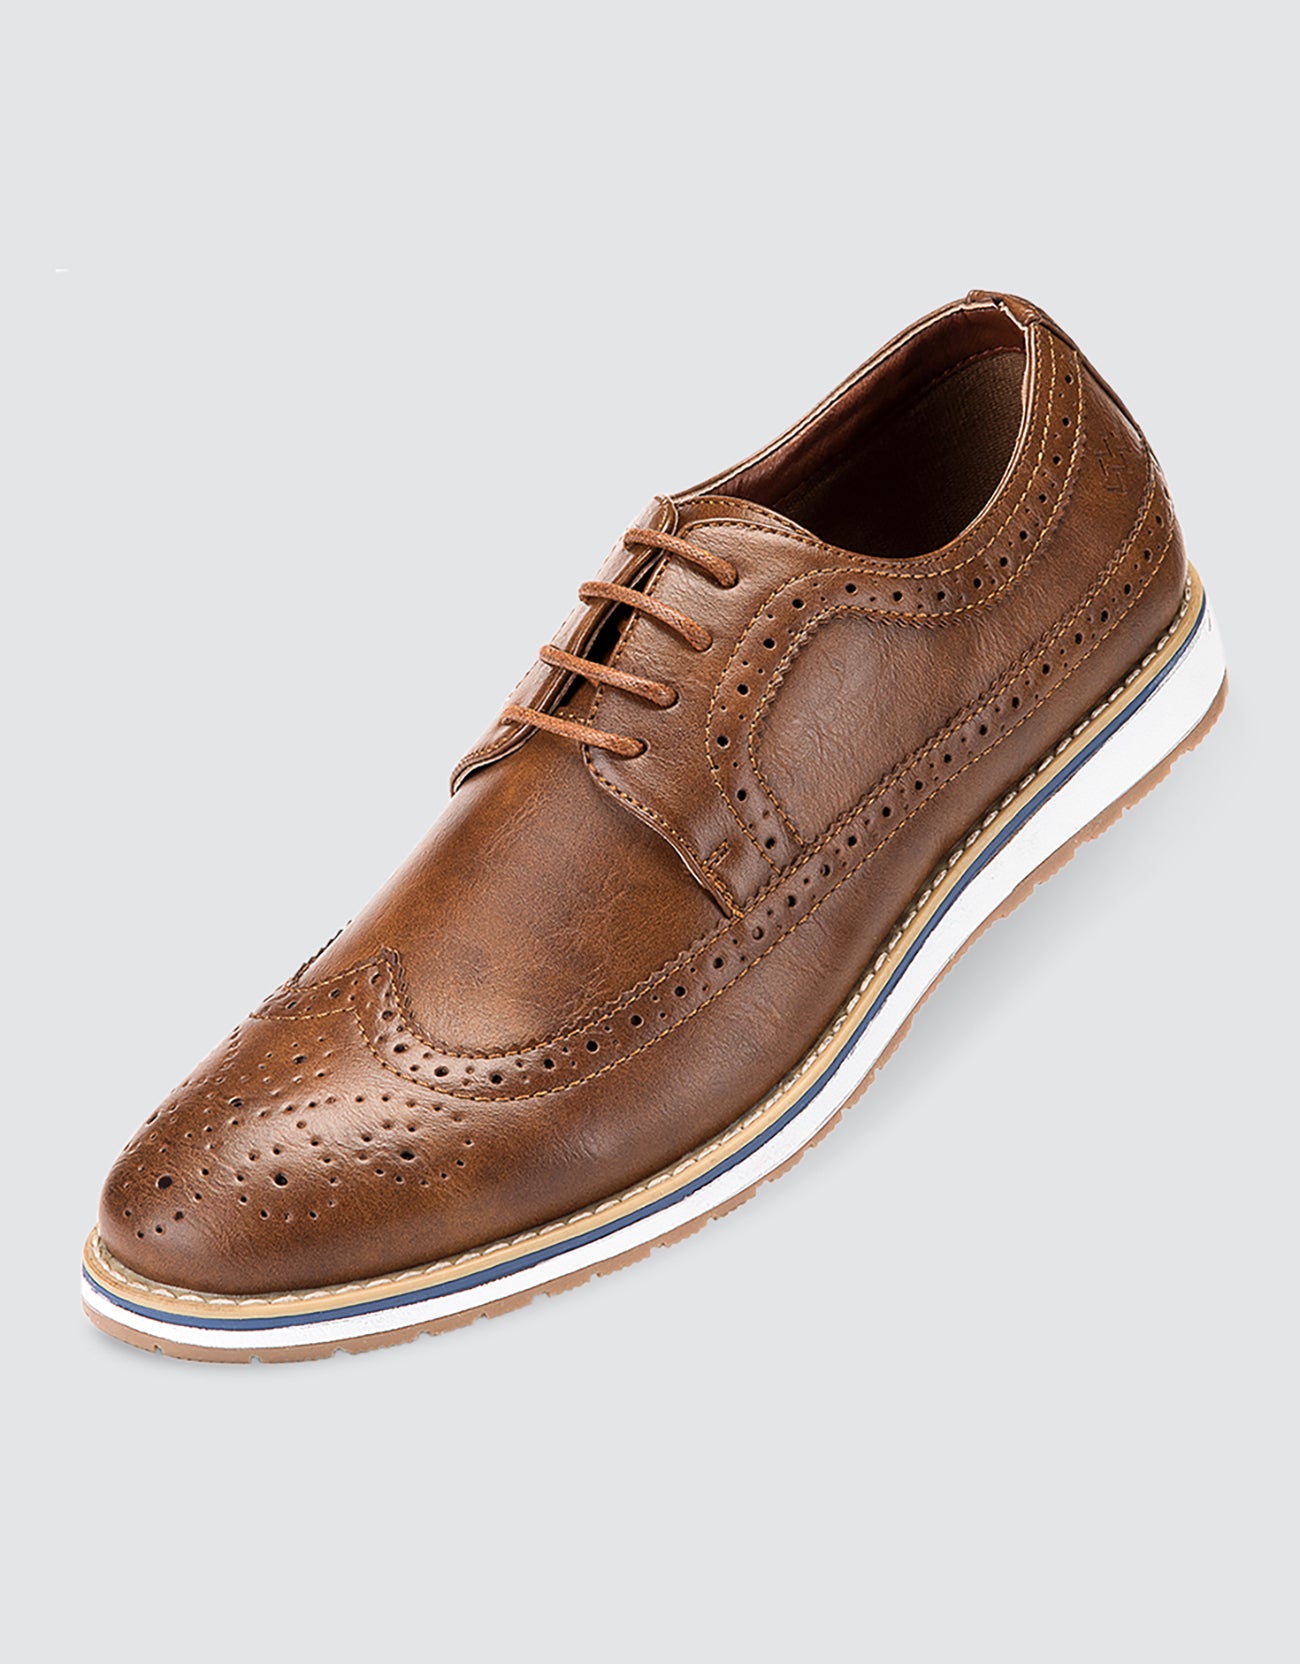 The Definitive Oxford Shoes Guide For Men | FashionBeans